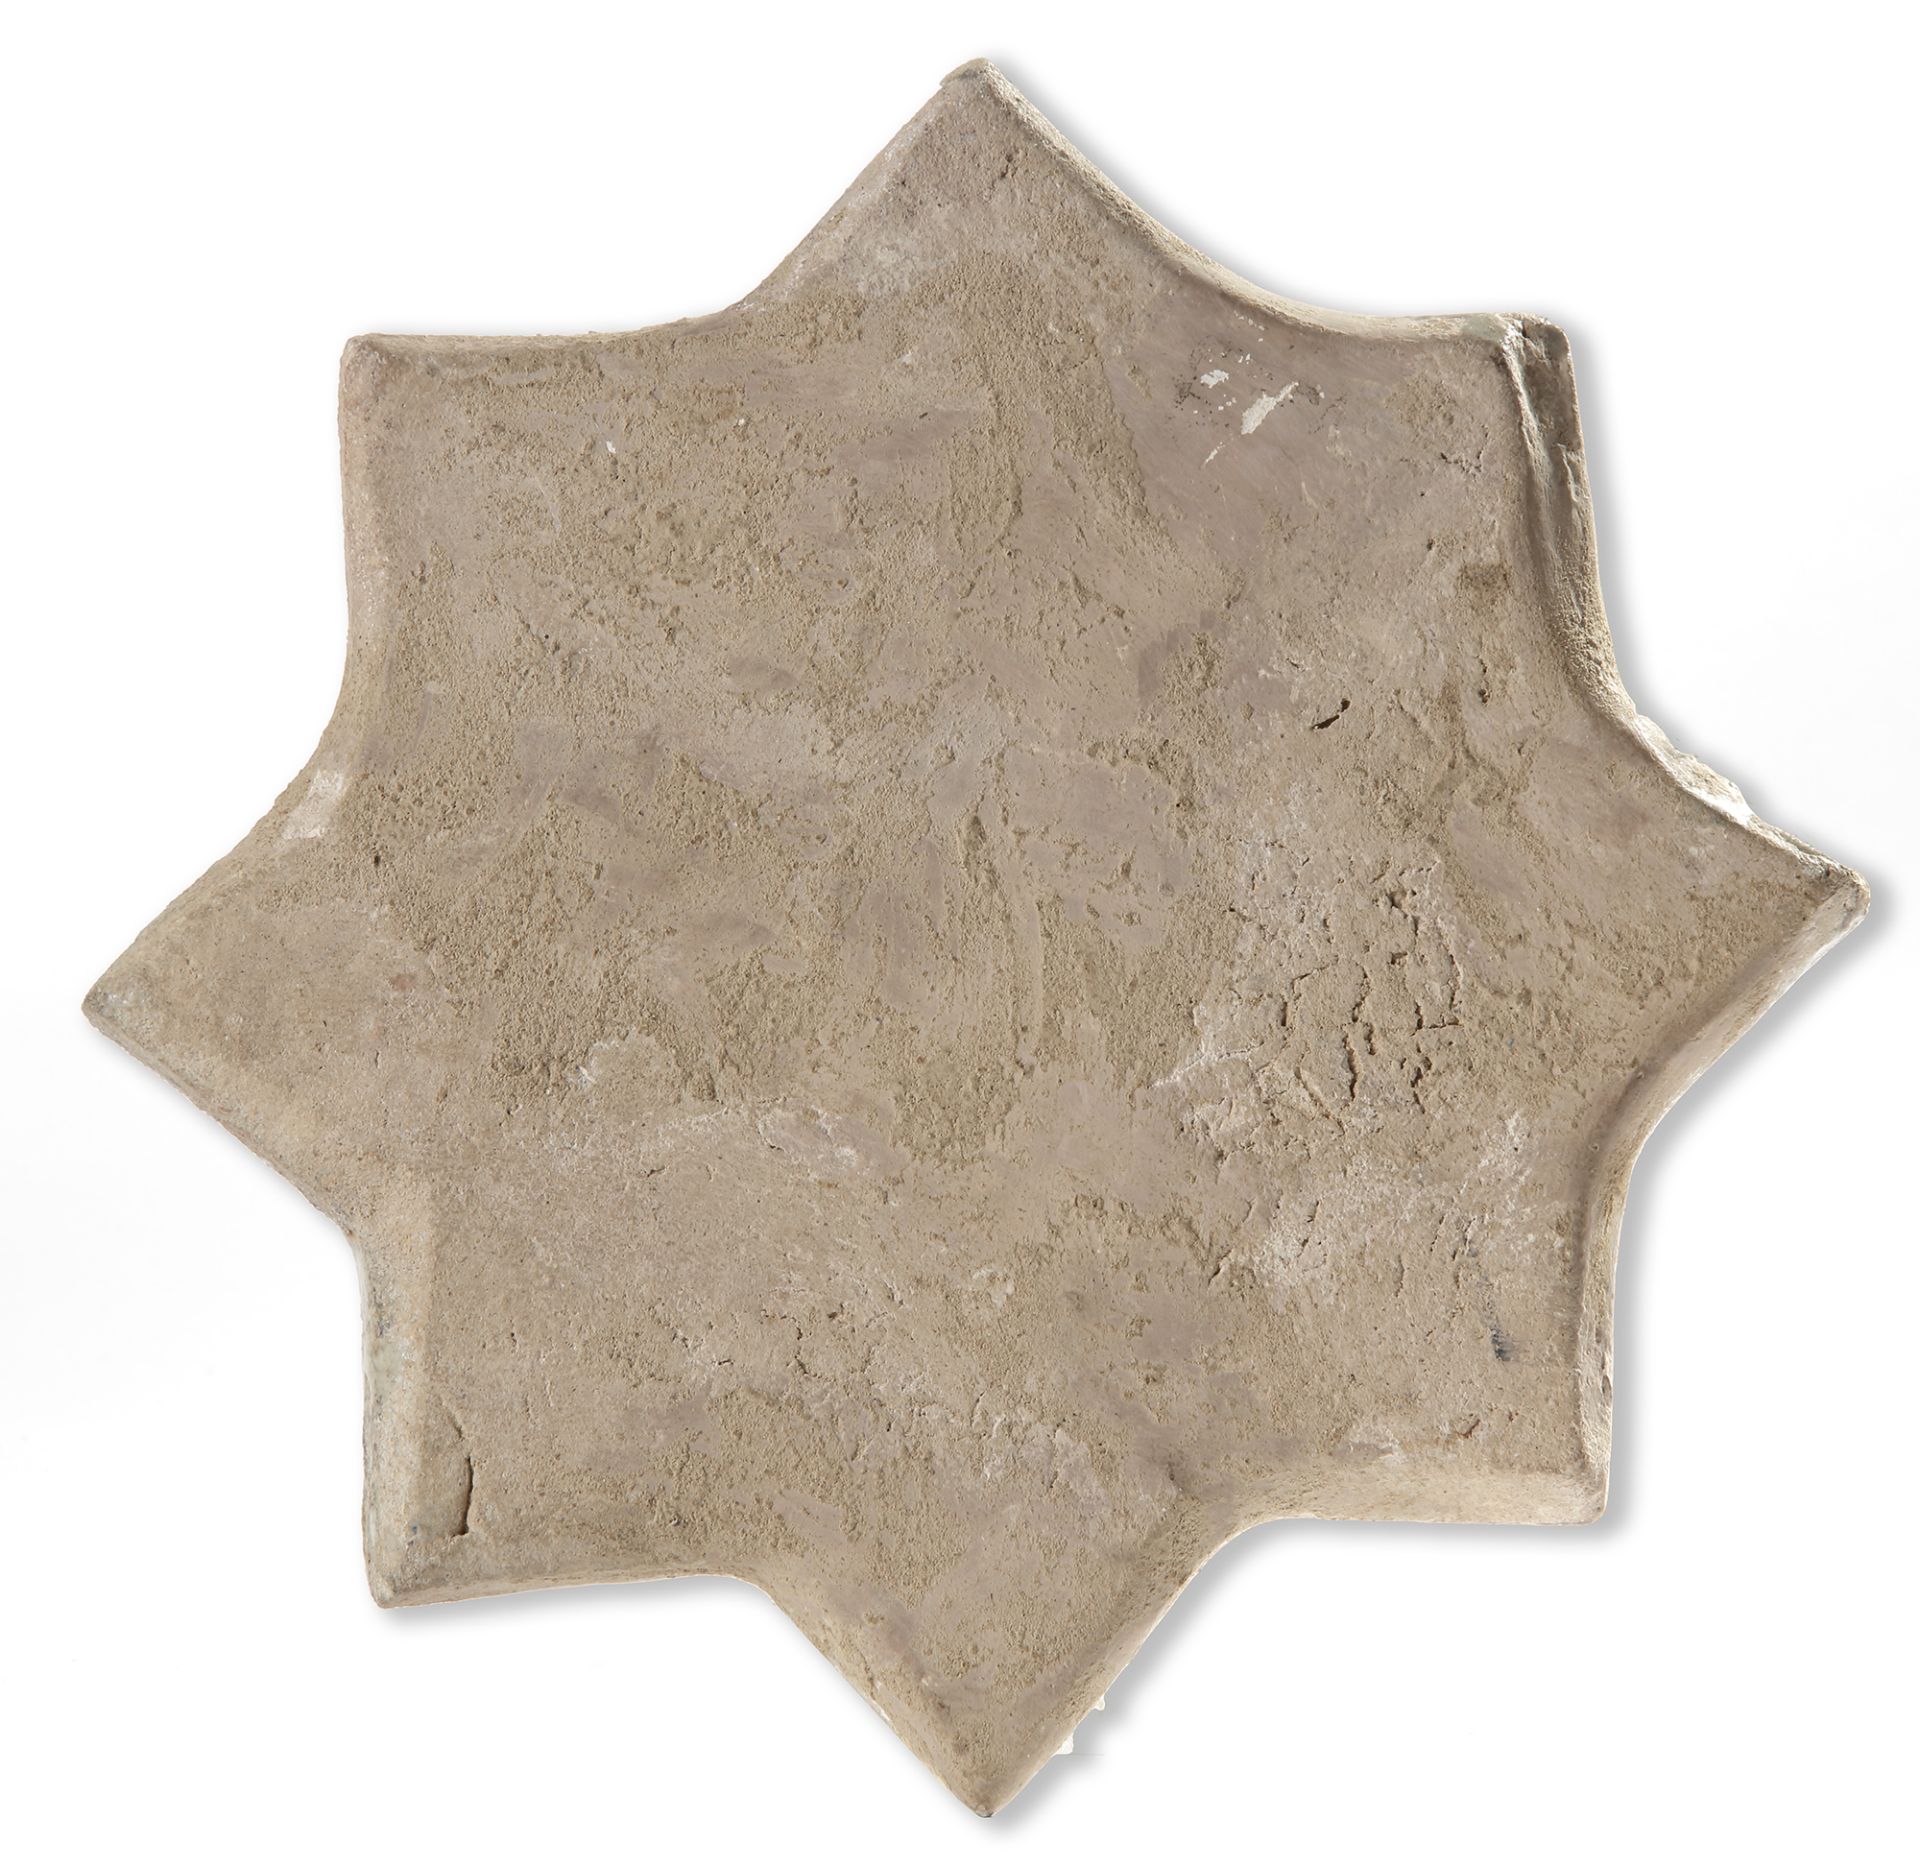 A STAR-SHAPED KASHAN TILE, PERSIA, 13TH-14TH CENTURY - Image 2 of 2